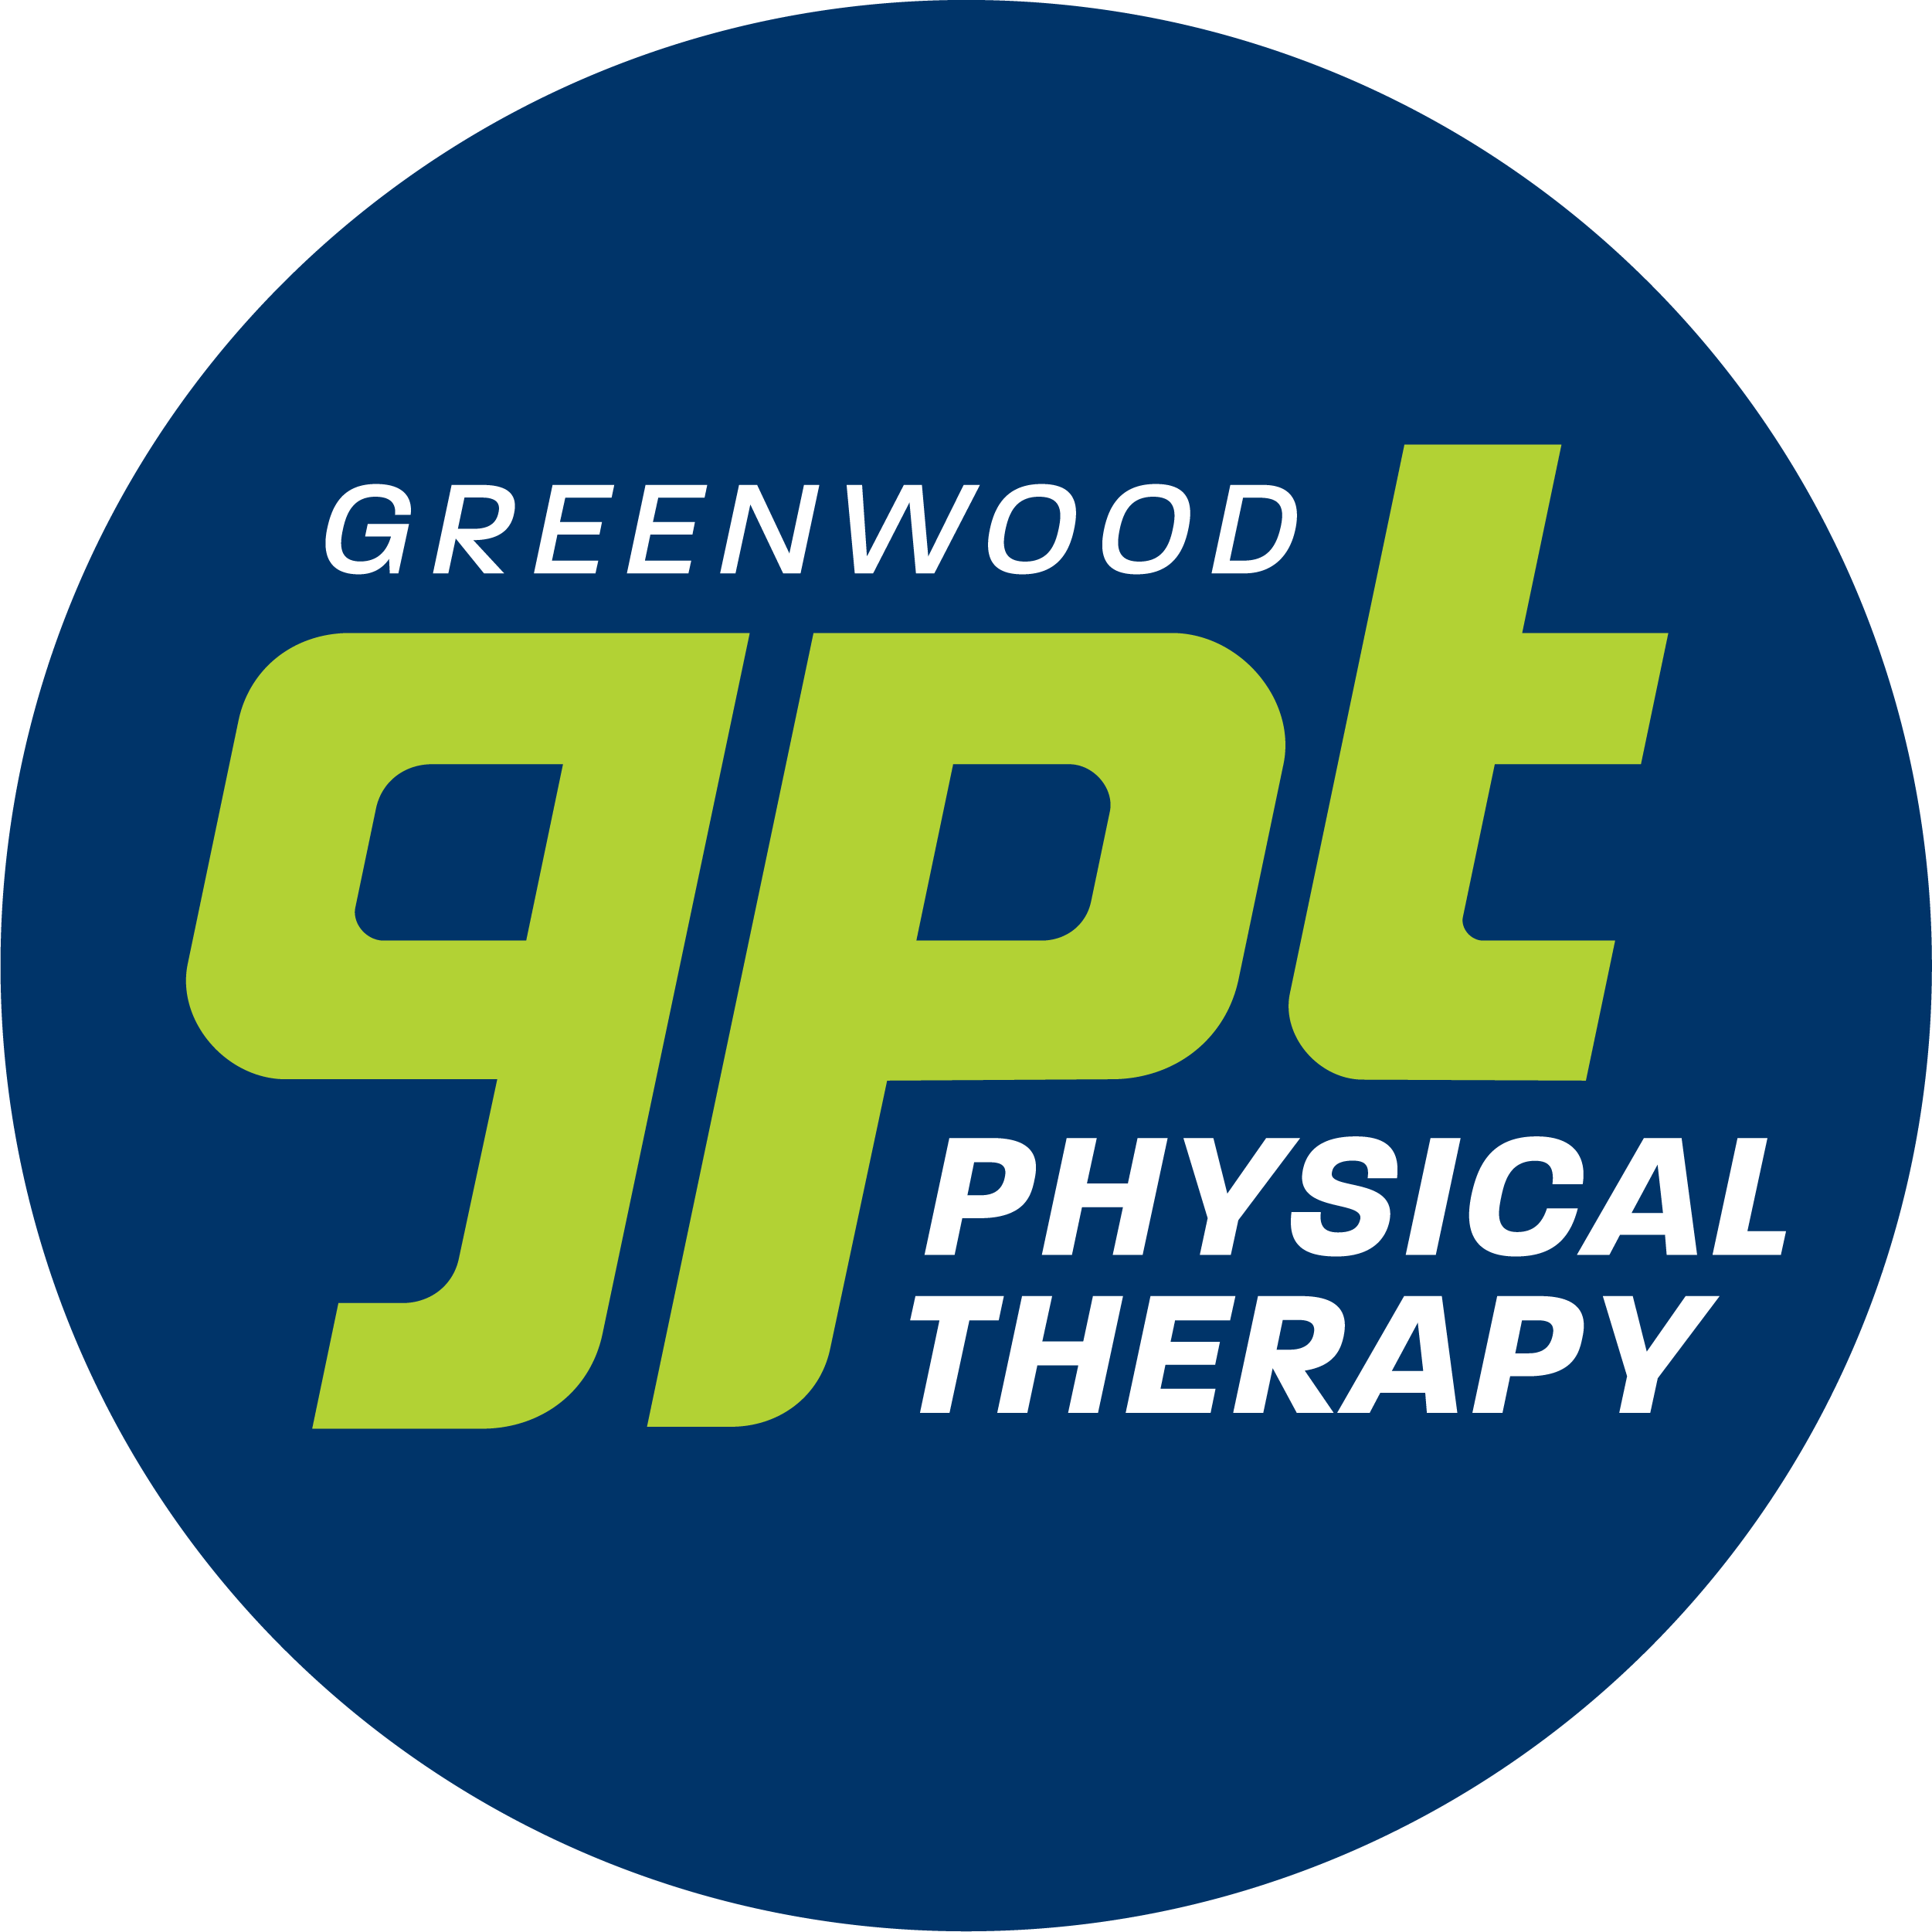 Physical Therapy Aide Jobs Bellingham Wa About Physical Therapy pertaining to Physical Therapy Jobs Durham Nc pertaining to Invigorate